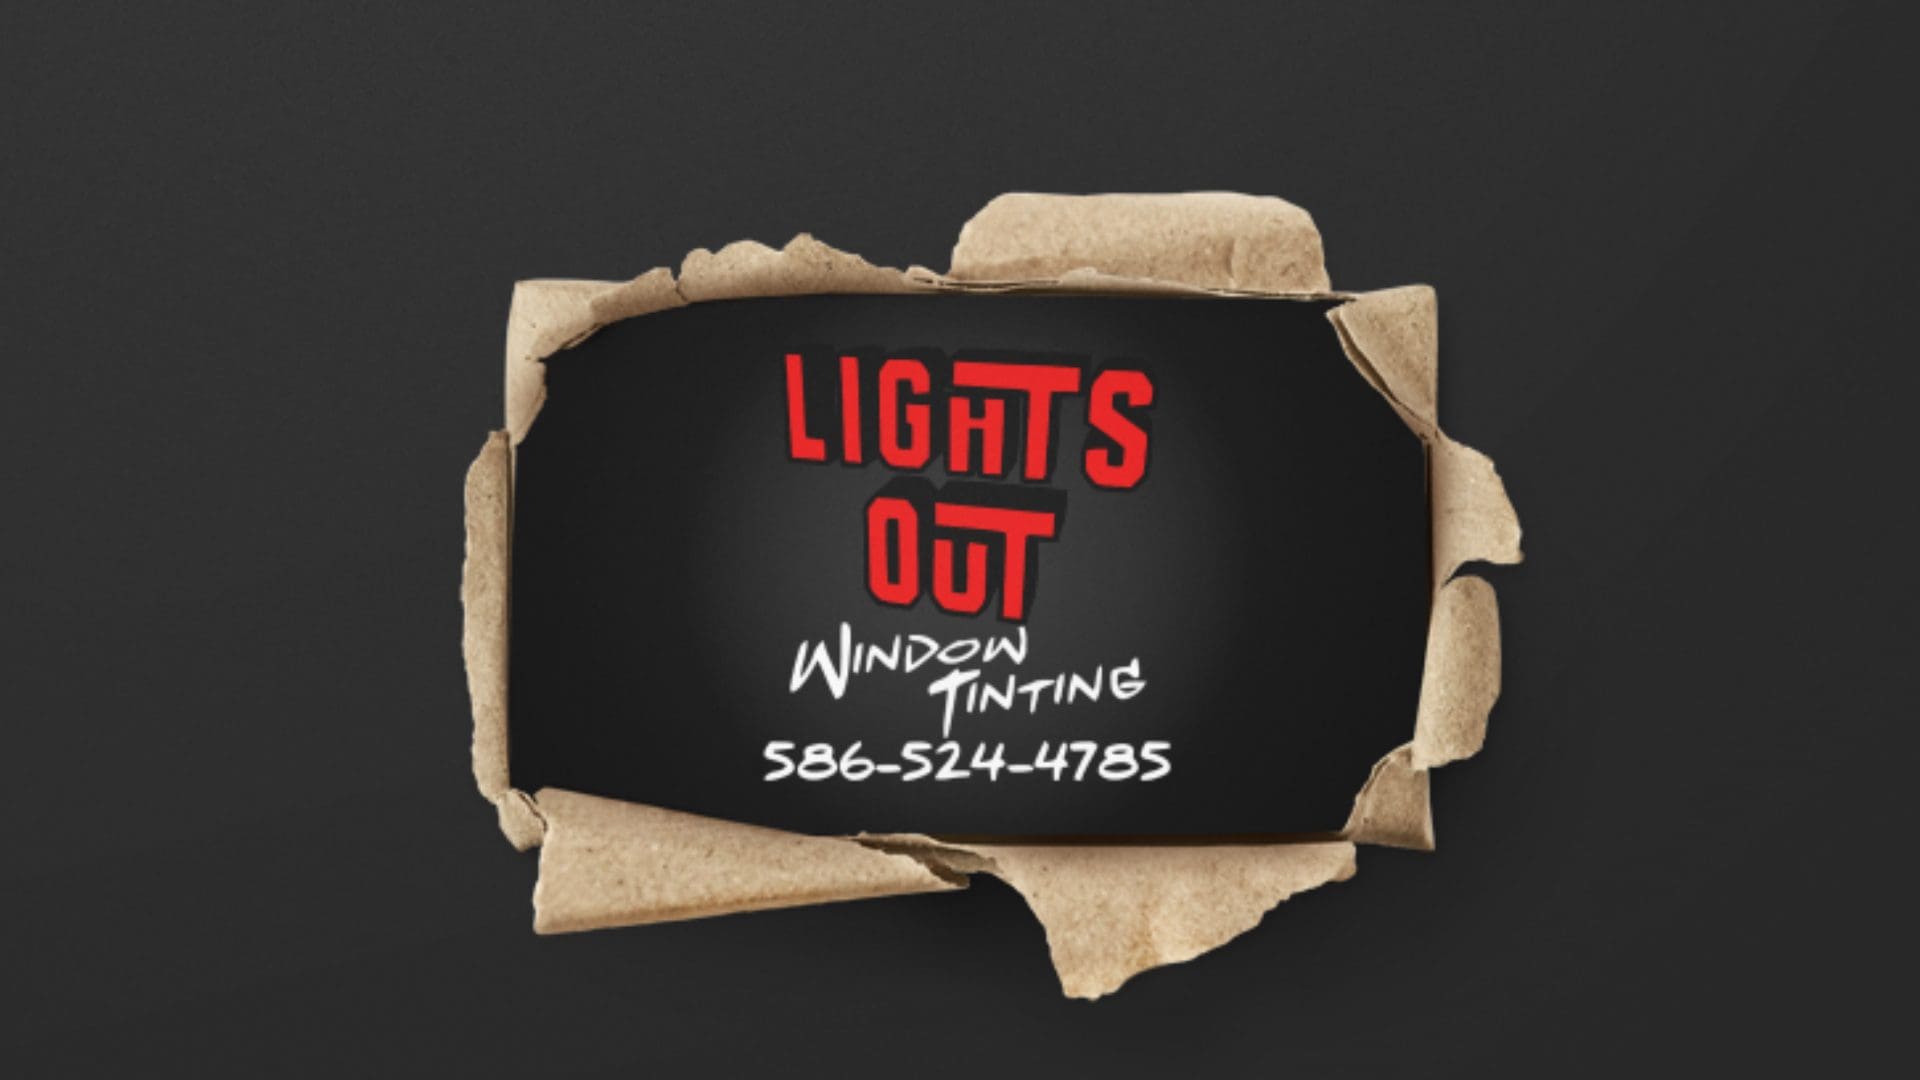 Lights Out Window Tinting - Business Card Mockup (3)